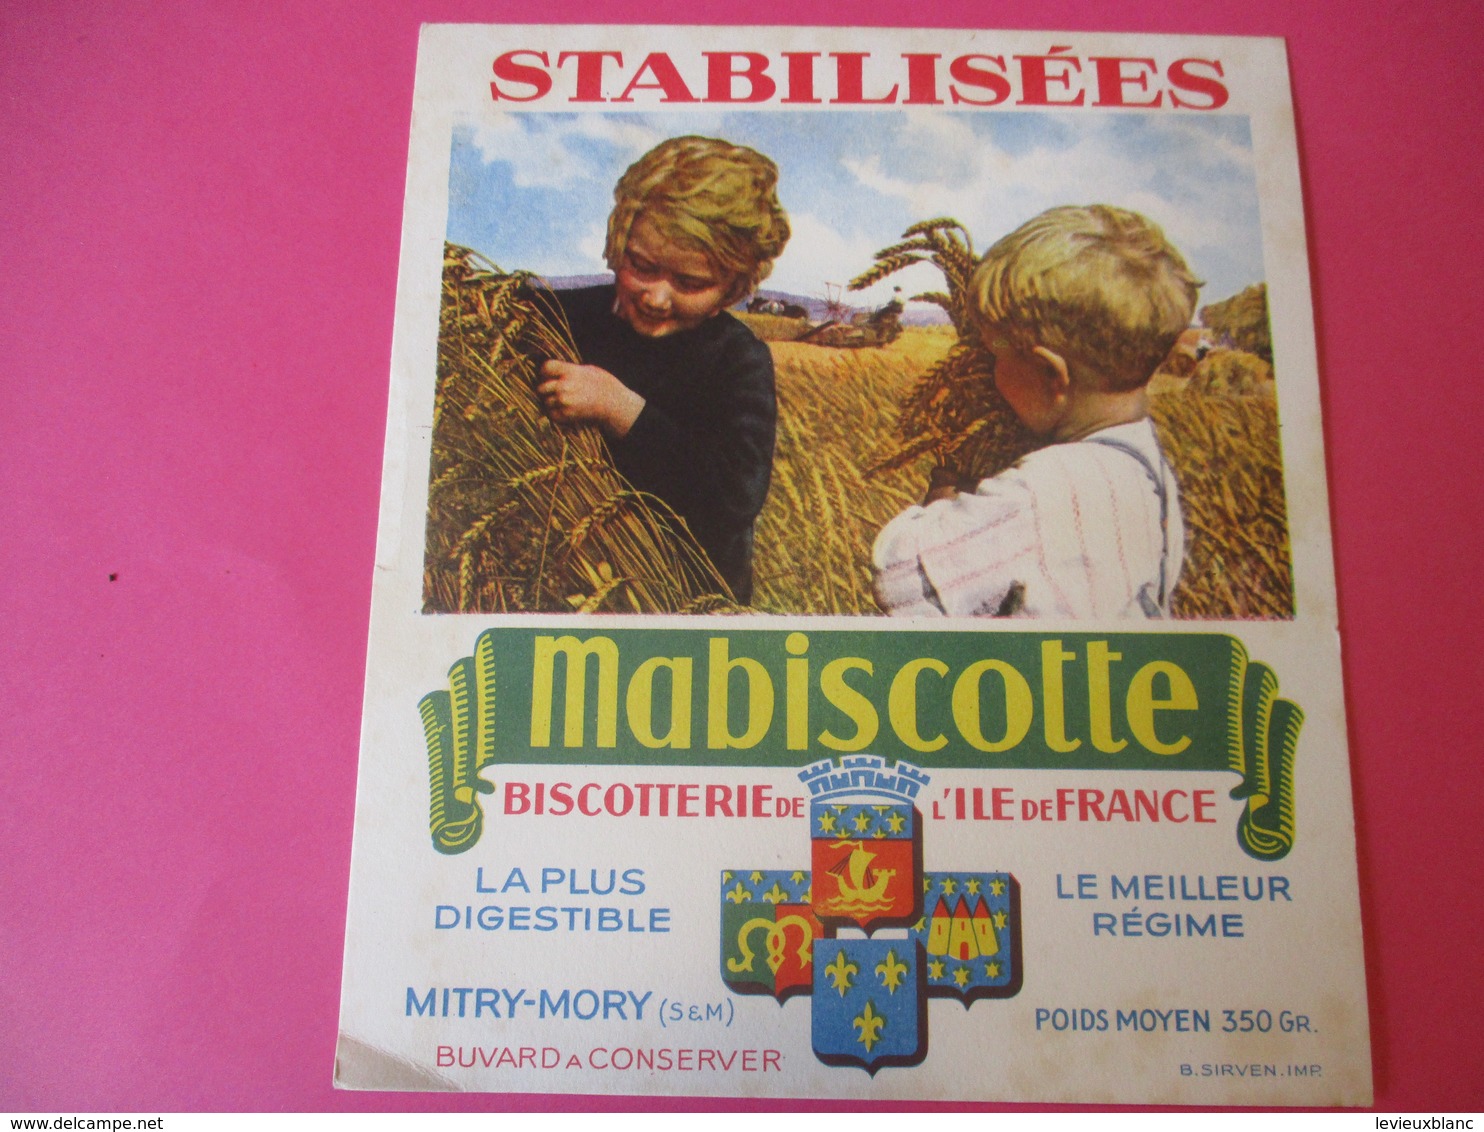 Buvard//Stabilisées/MABISCOTTE/MOISSON/Biscotterie Ile De France/MITRY-MORY(S&M)/Sirven/Vers 1940-60  BUV441 - Biscottes